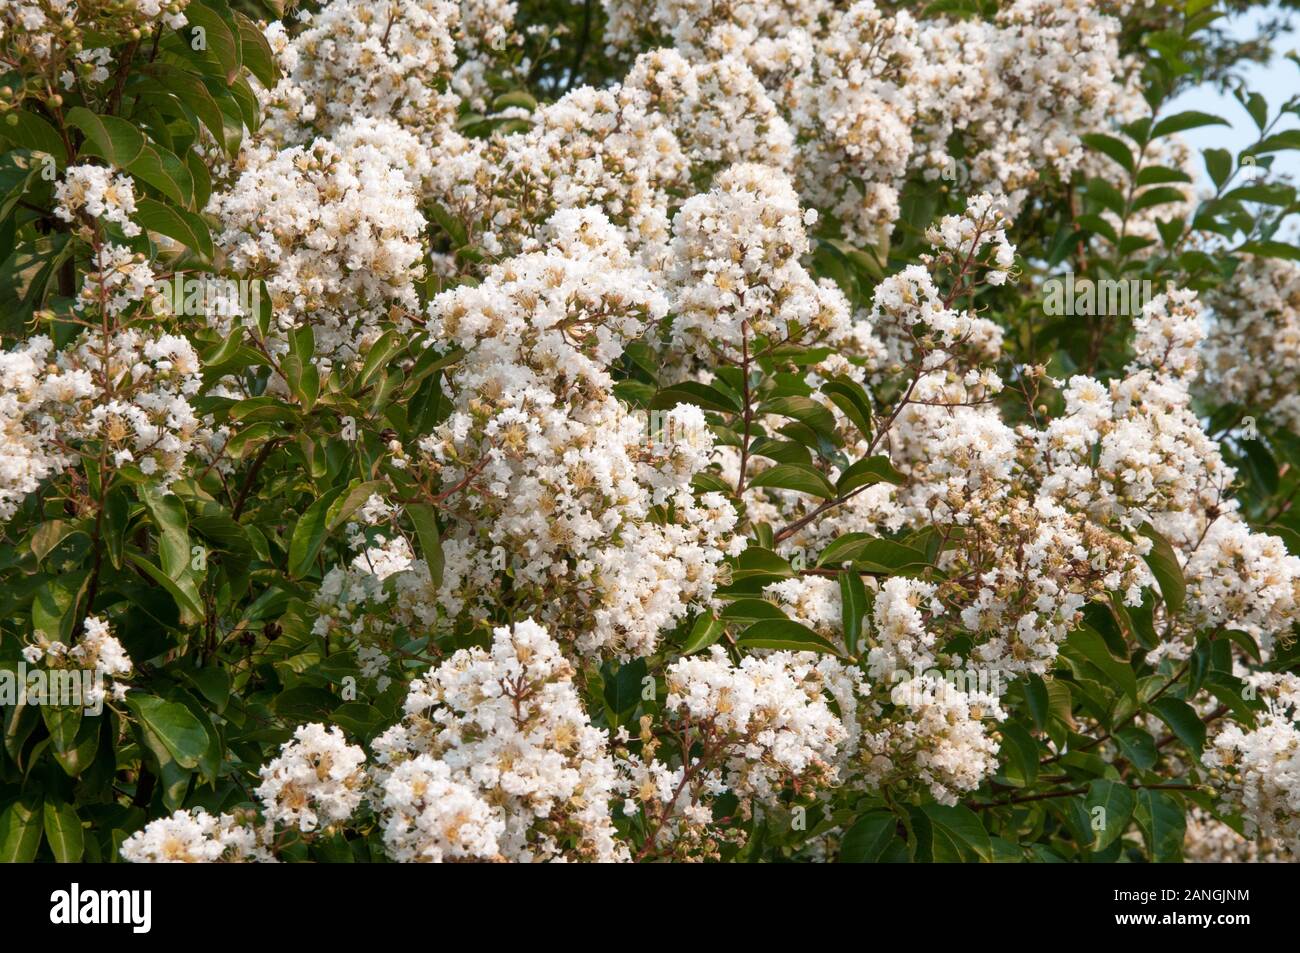 Crepe Myrtle, Lagerstroemia indica, a deciduous ornamental tree. Trusses of white, pink, mauve or purple blooms appear in late summer. Stock Photo